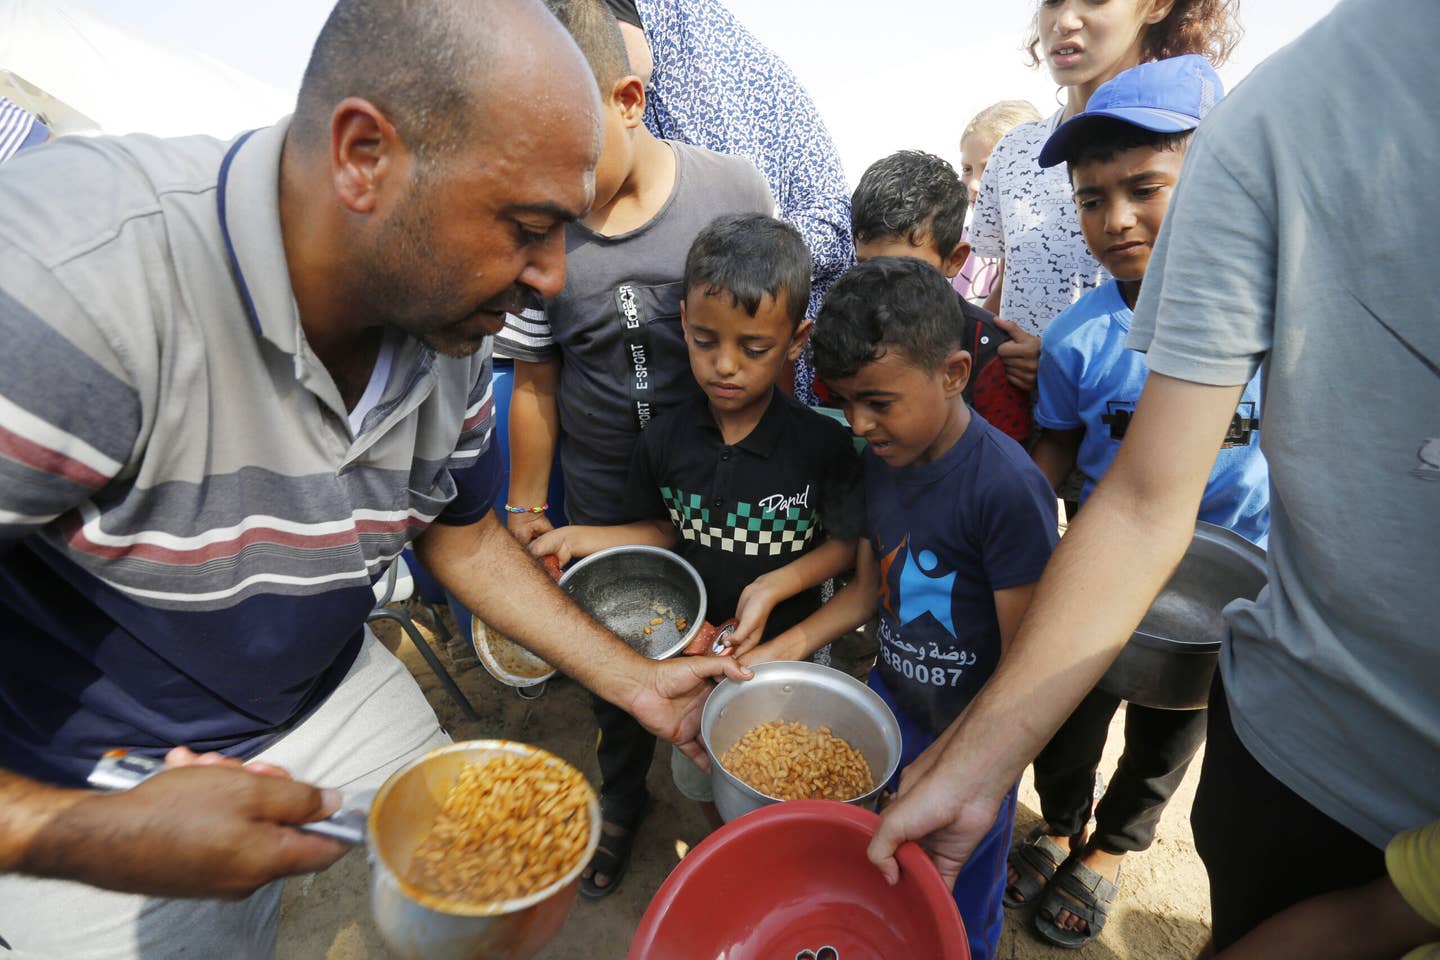 Palestinians including children are served food by United Nations Agency for Palestine Refugees (UNRWA) officials as they took refuge in UNRWA camp to flee Israeli attacks in Khan Yunis, Gaza on October 24, 2023. (Photo by Ashraf Amra/Anadolu via Getty Images)